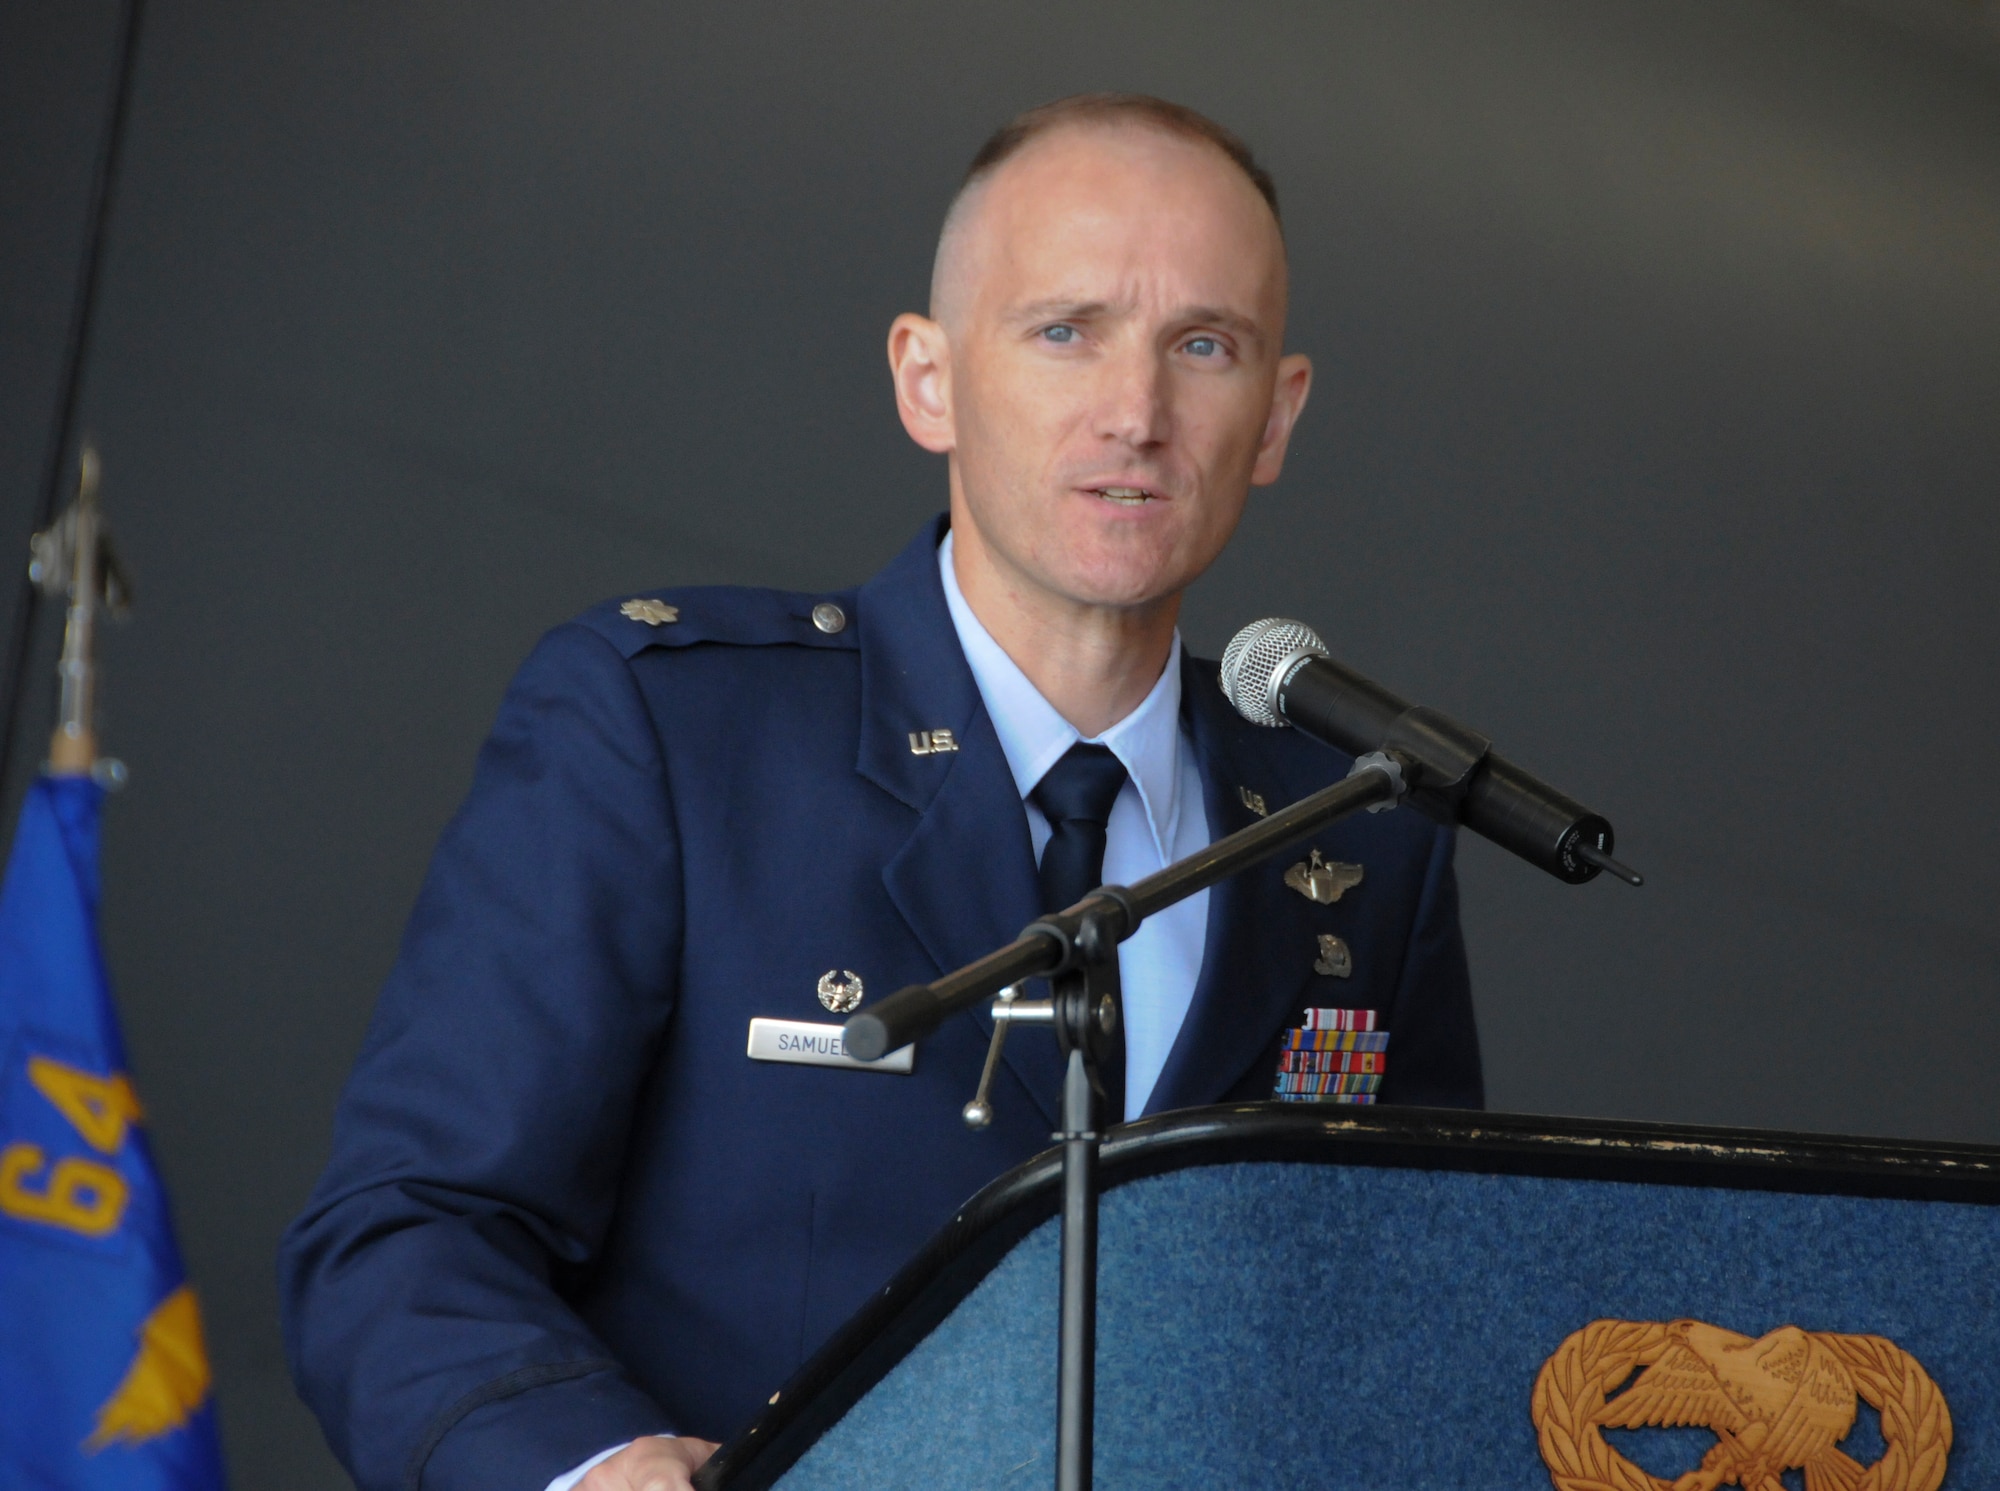 Lt. Col. Ryan Samuelson speaks after assuming command of the 64th Air Refueling Squadron, Pease Air National Guard Base, N.H., June 2, 2011.